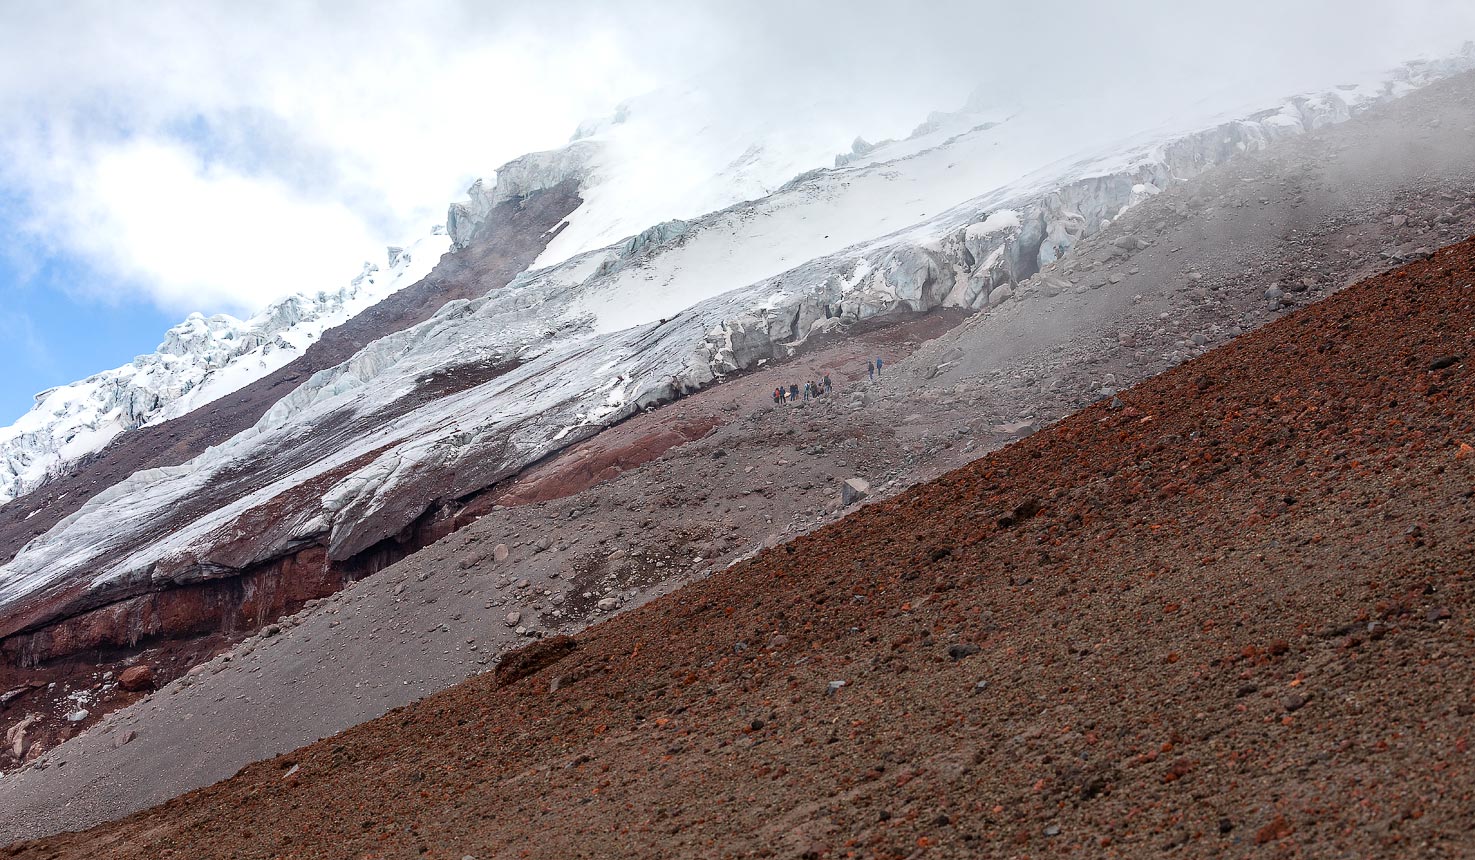 Safari to Cotopaxi Refuge with Africa Travel Resource